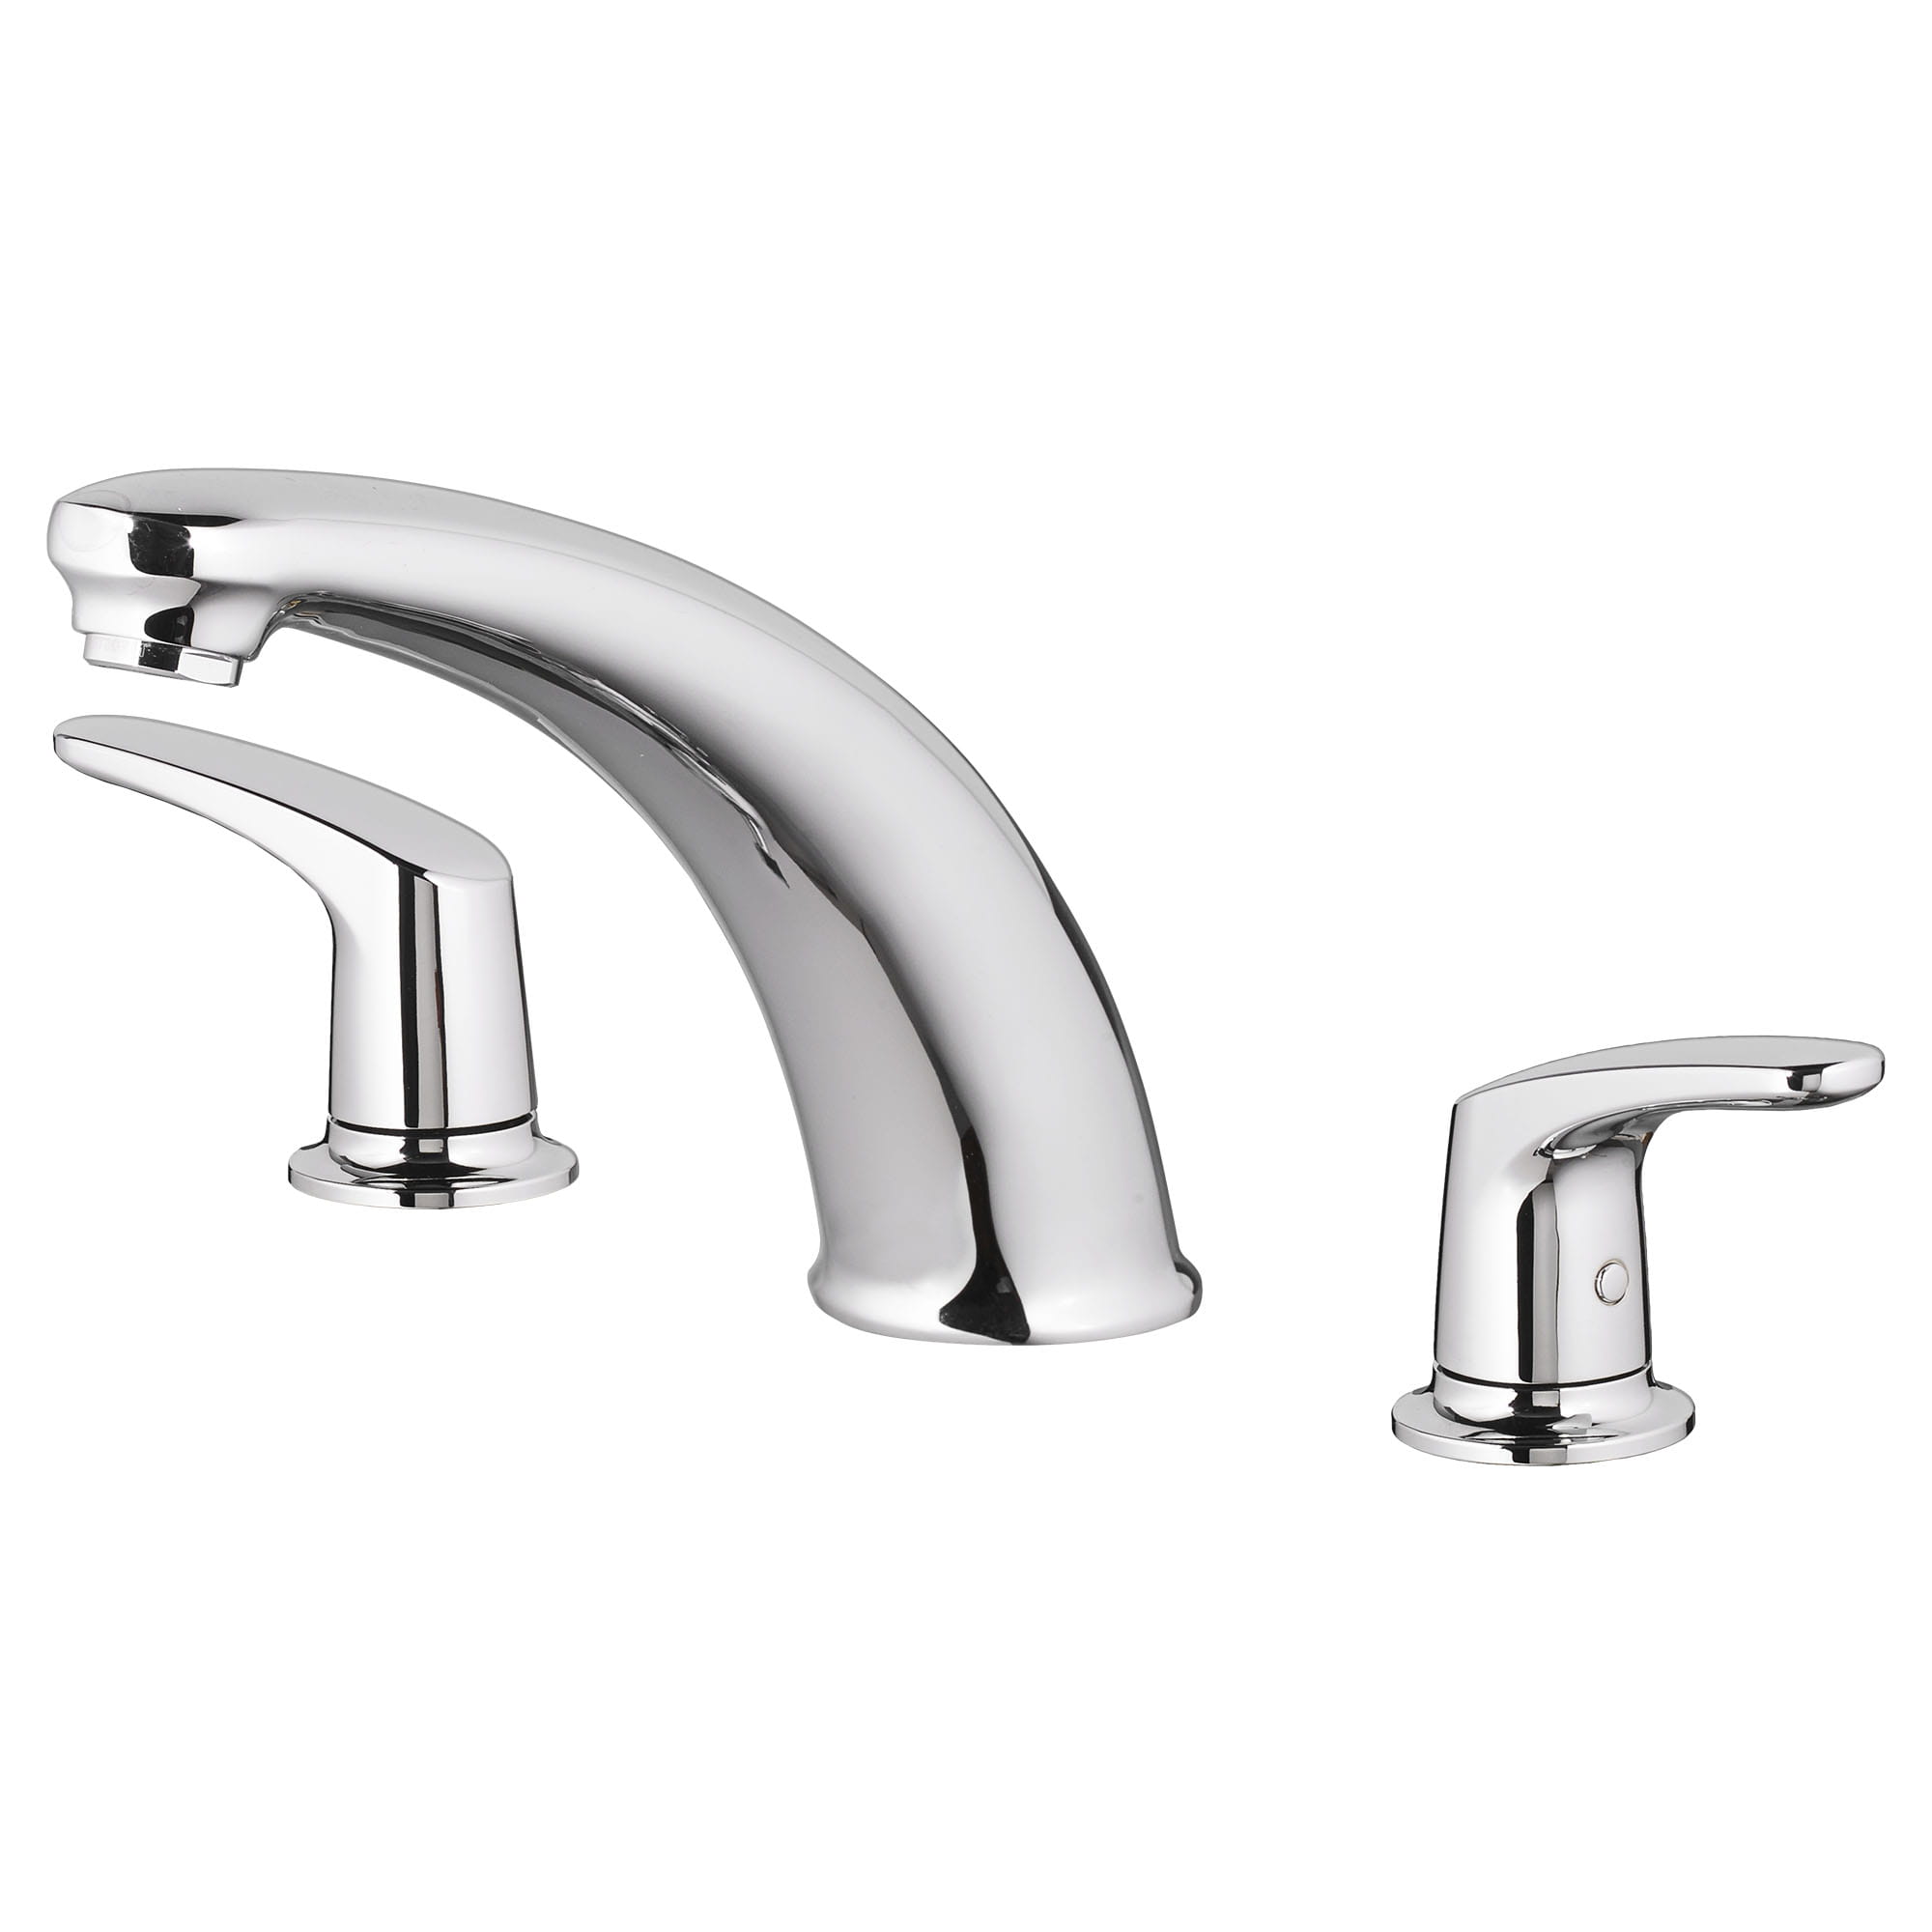 Colony PRO Bathtub Faucet Trim With Lever Handles for Flash Rough In Valve CHROME